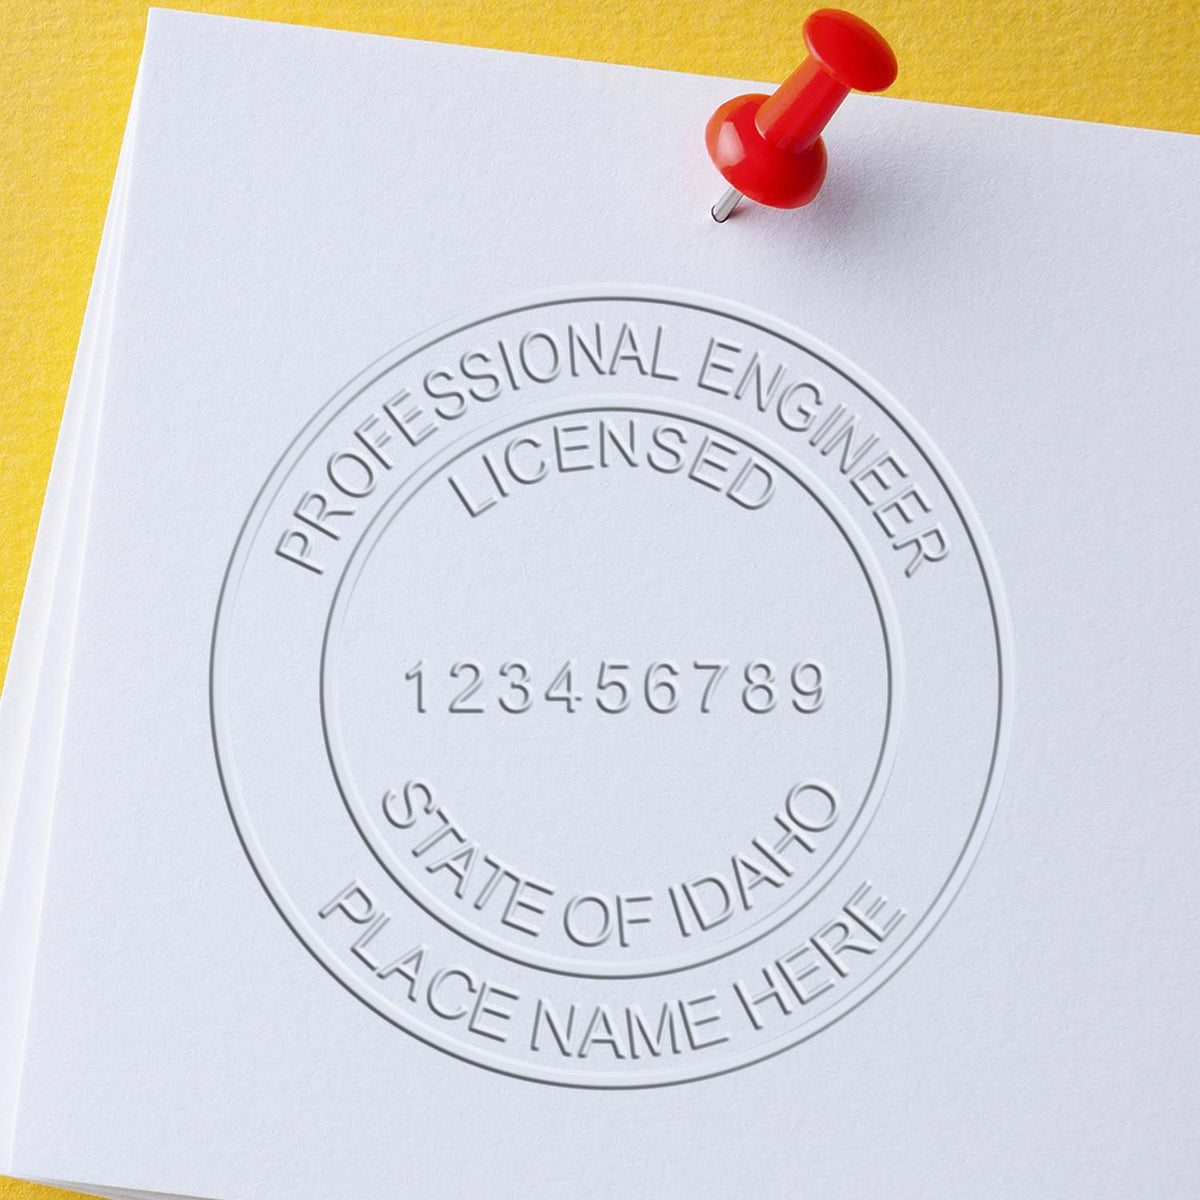 A photograph of the Idaho Engineer Desk Seal stamp impression reveals a vivid, professional image of the on paper.